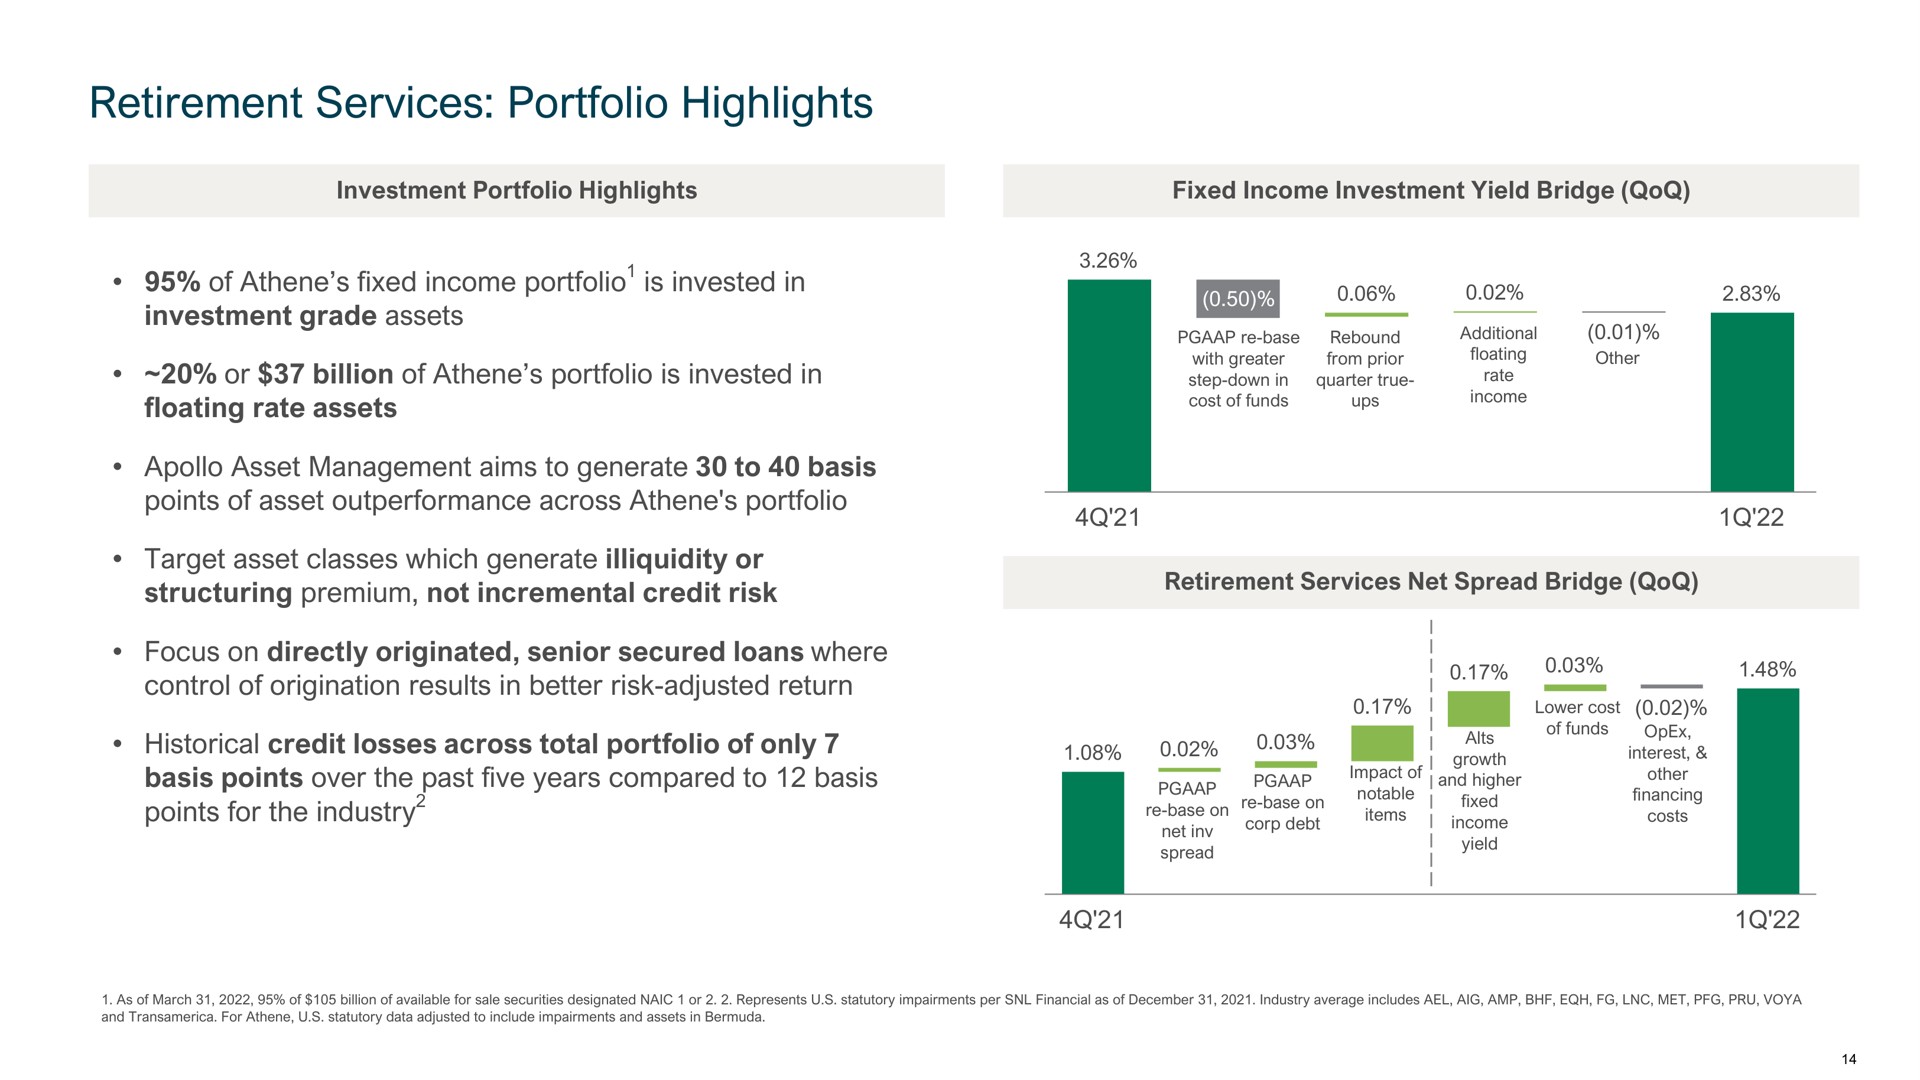 retirement services portfolio highlights or billion of is invested in target asset classes which generate illiquidity or structuring premium not incremental credit risk ais quarter true in net spread bridge | Apollo Global Management